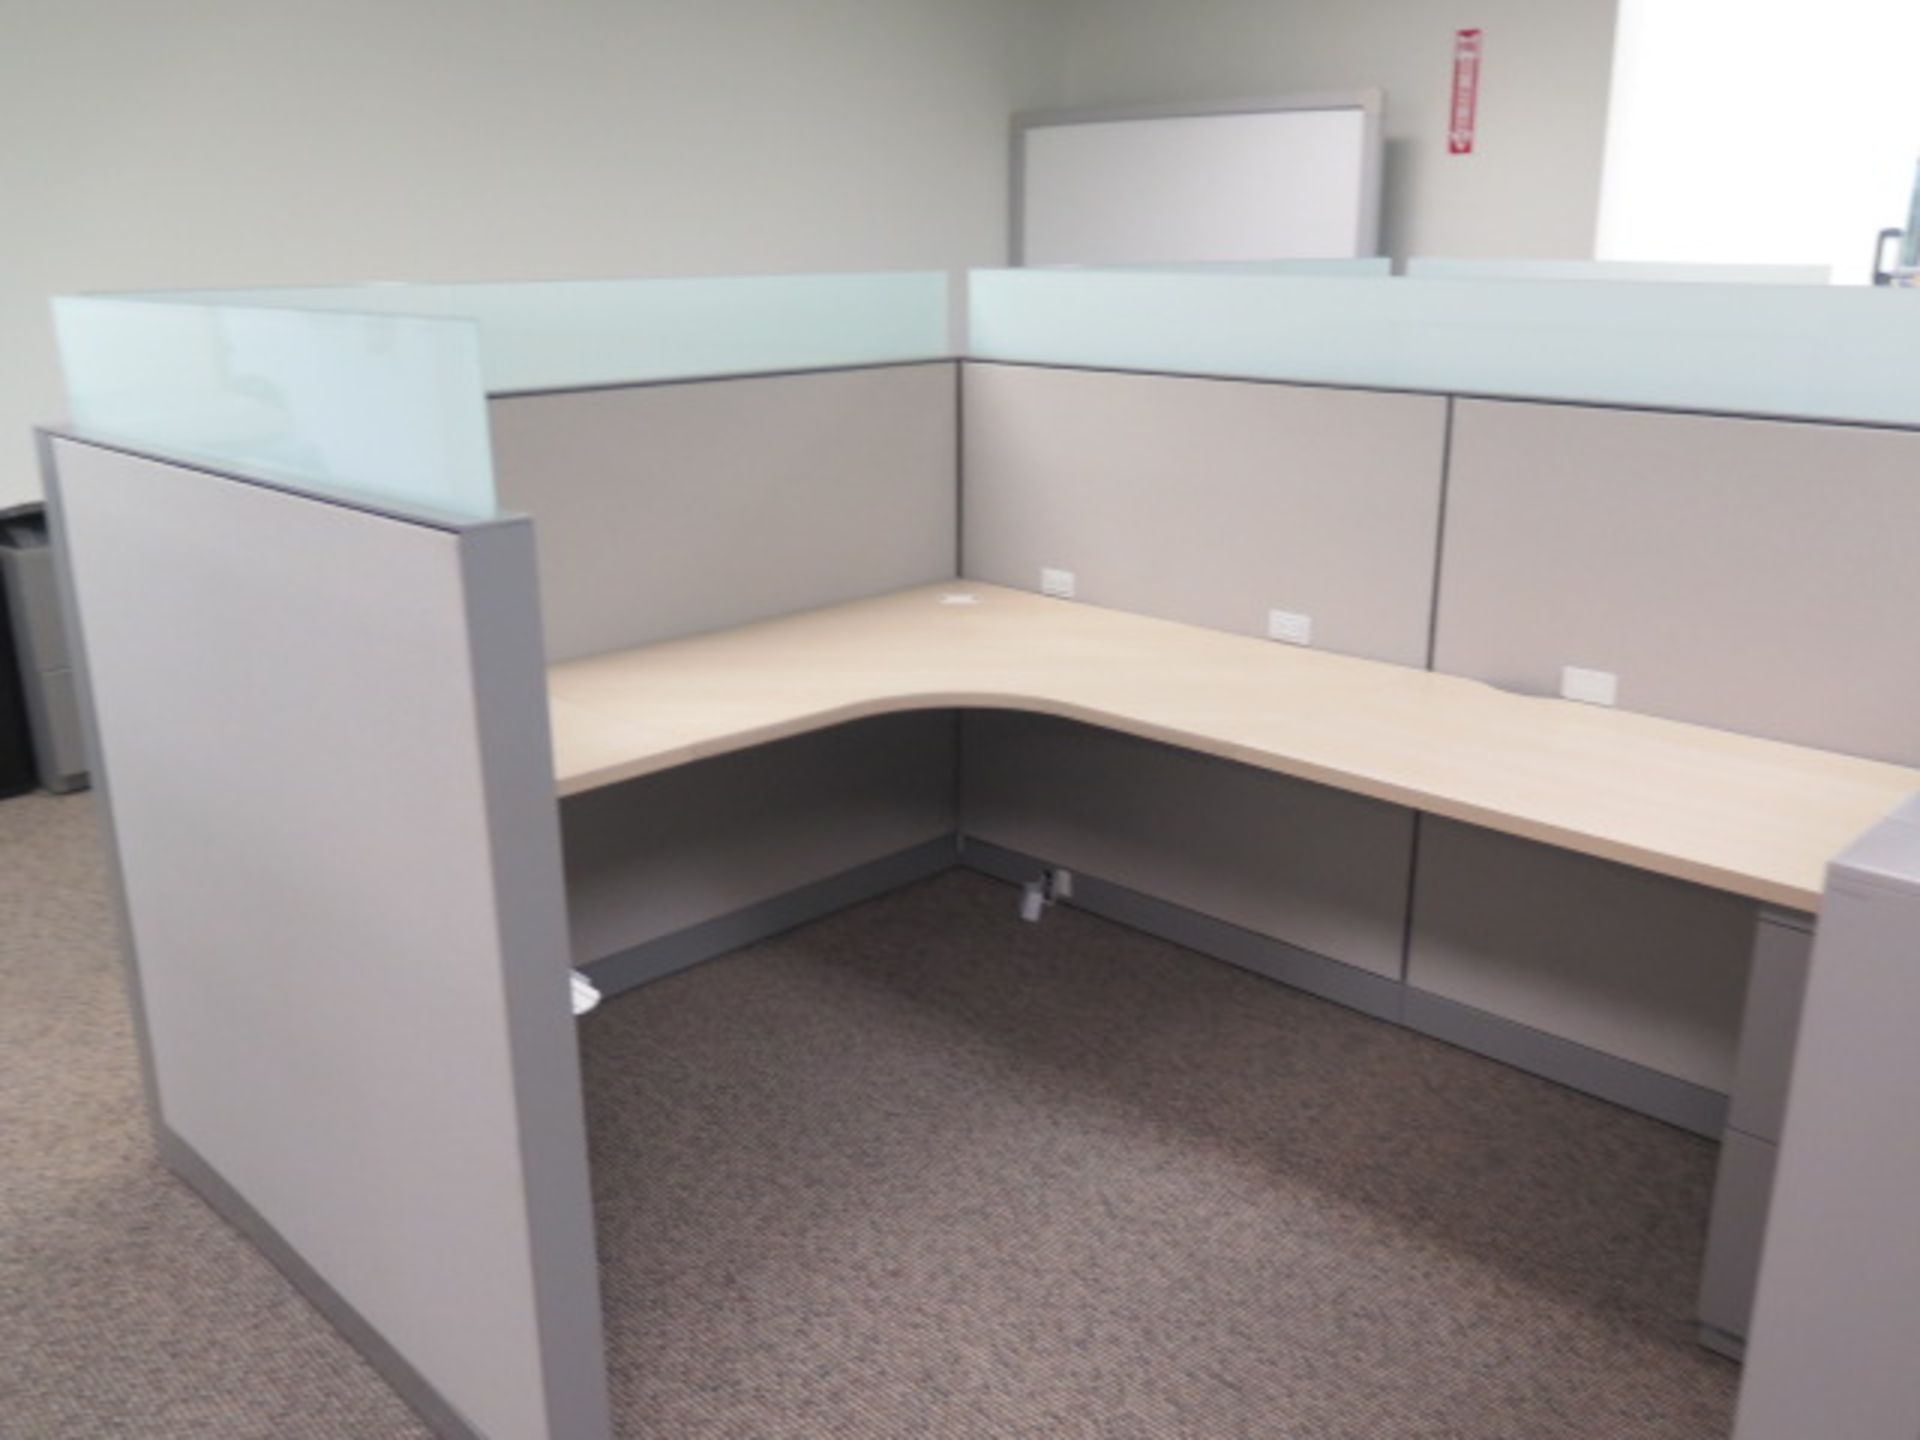 Allsteel Inc Office Cubicles (12) (SOLD AS-IS - NO WARRANTY) - Image 7 of 8